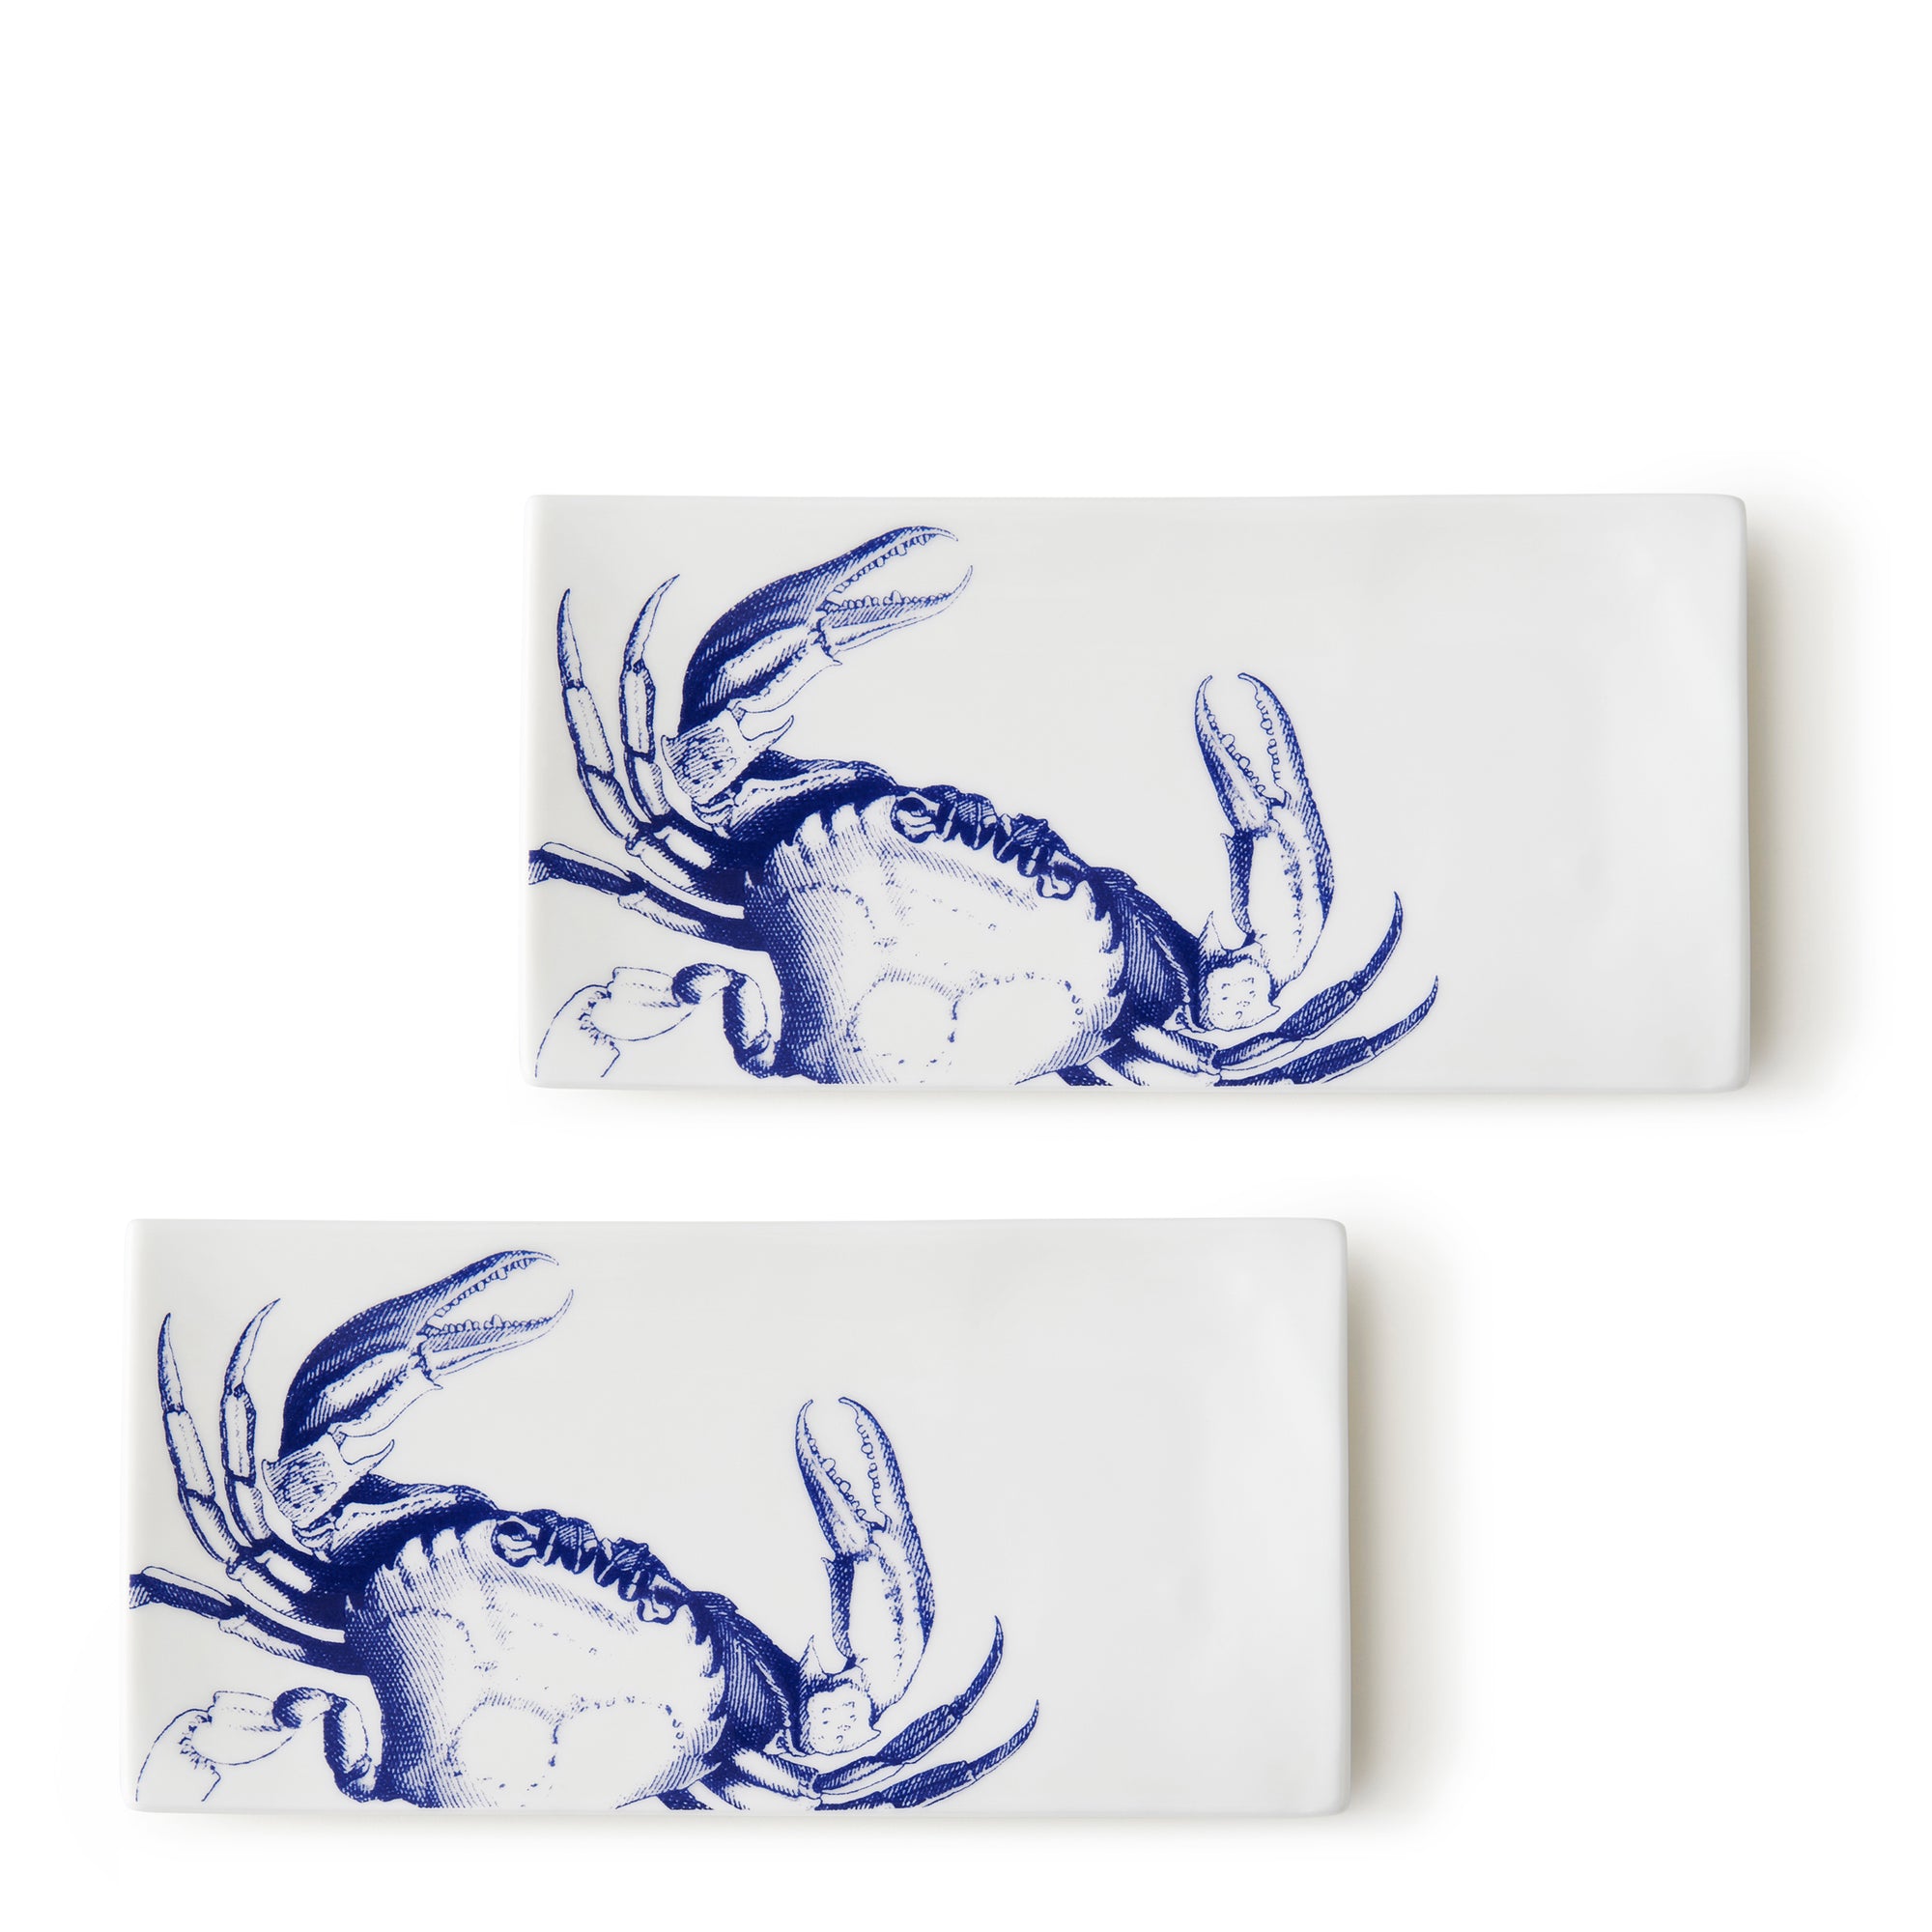 Two rectangular bone china trays featuring a high-style blue crab pattern on one corner. The **Crab Medium Sushi Trays, Set of 2** by **Caskata** are positioned at a slight angle to each other.